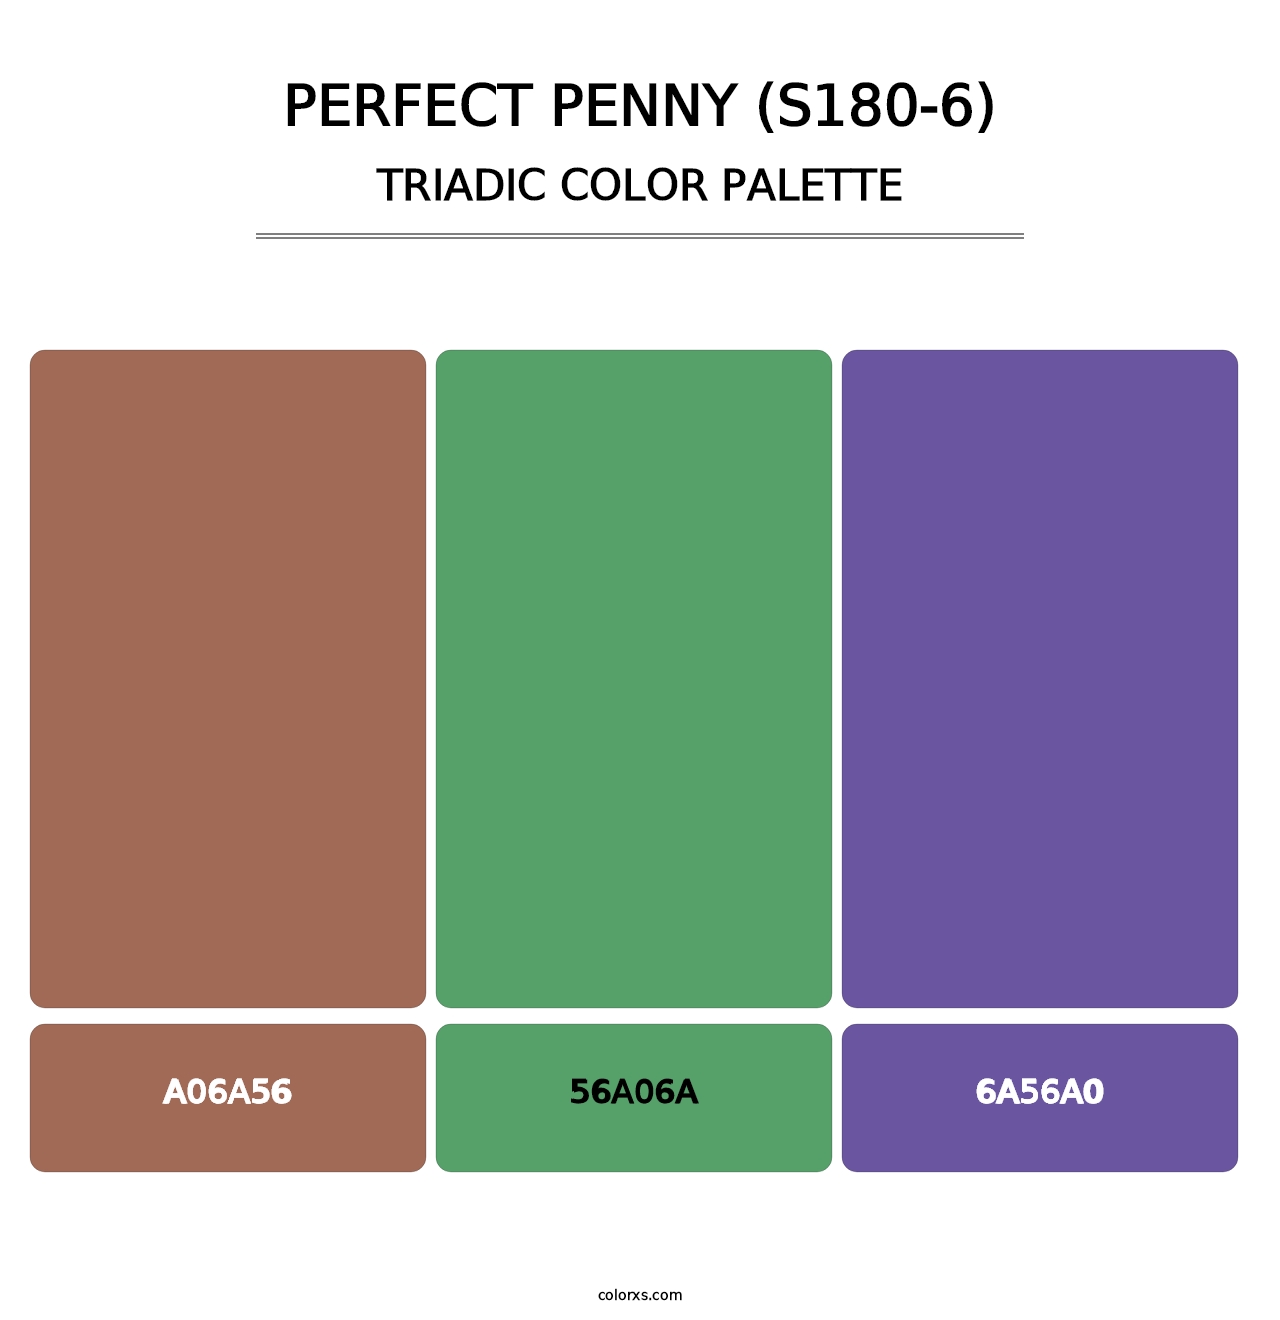 Perfect Penny (S180-6) - Triadic Color Palette